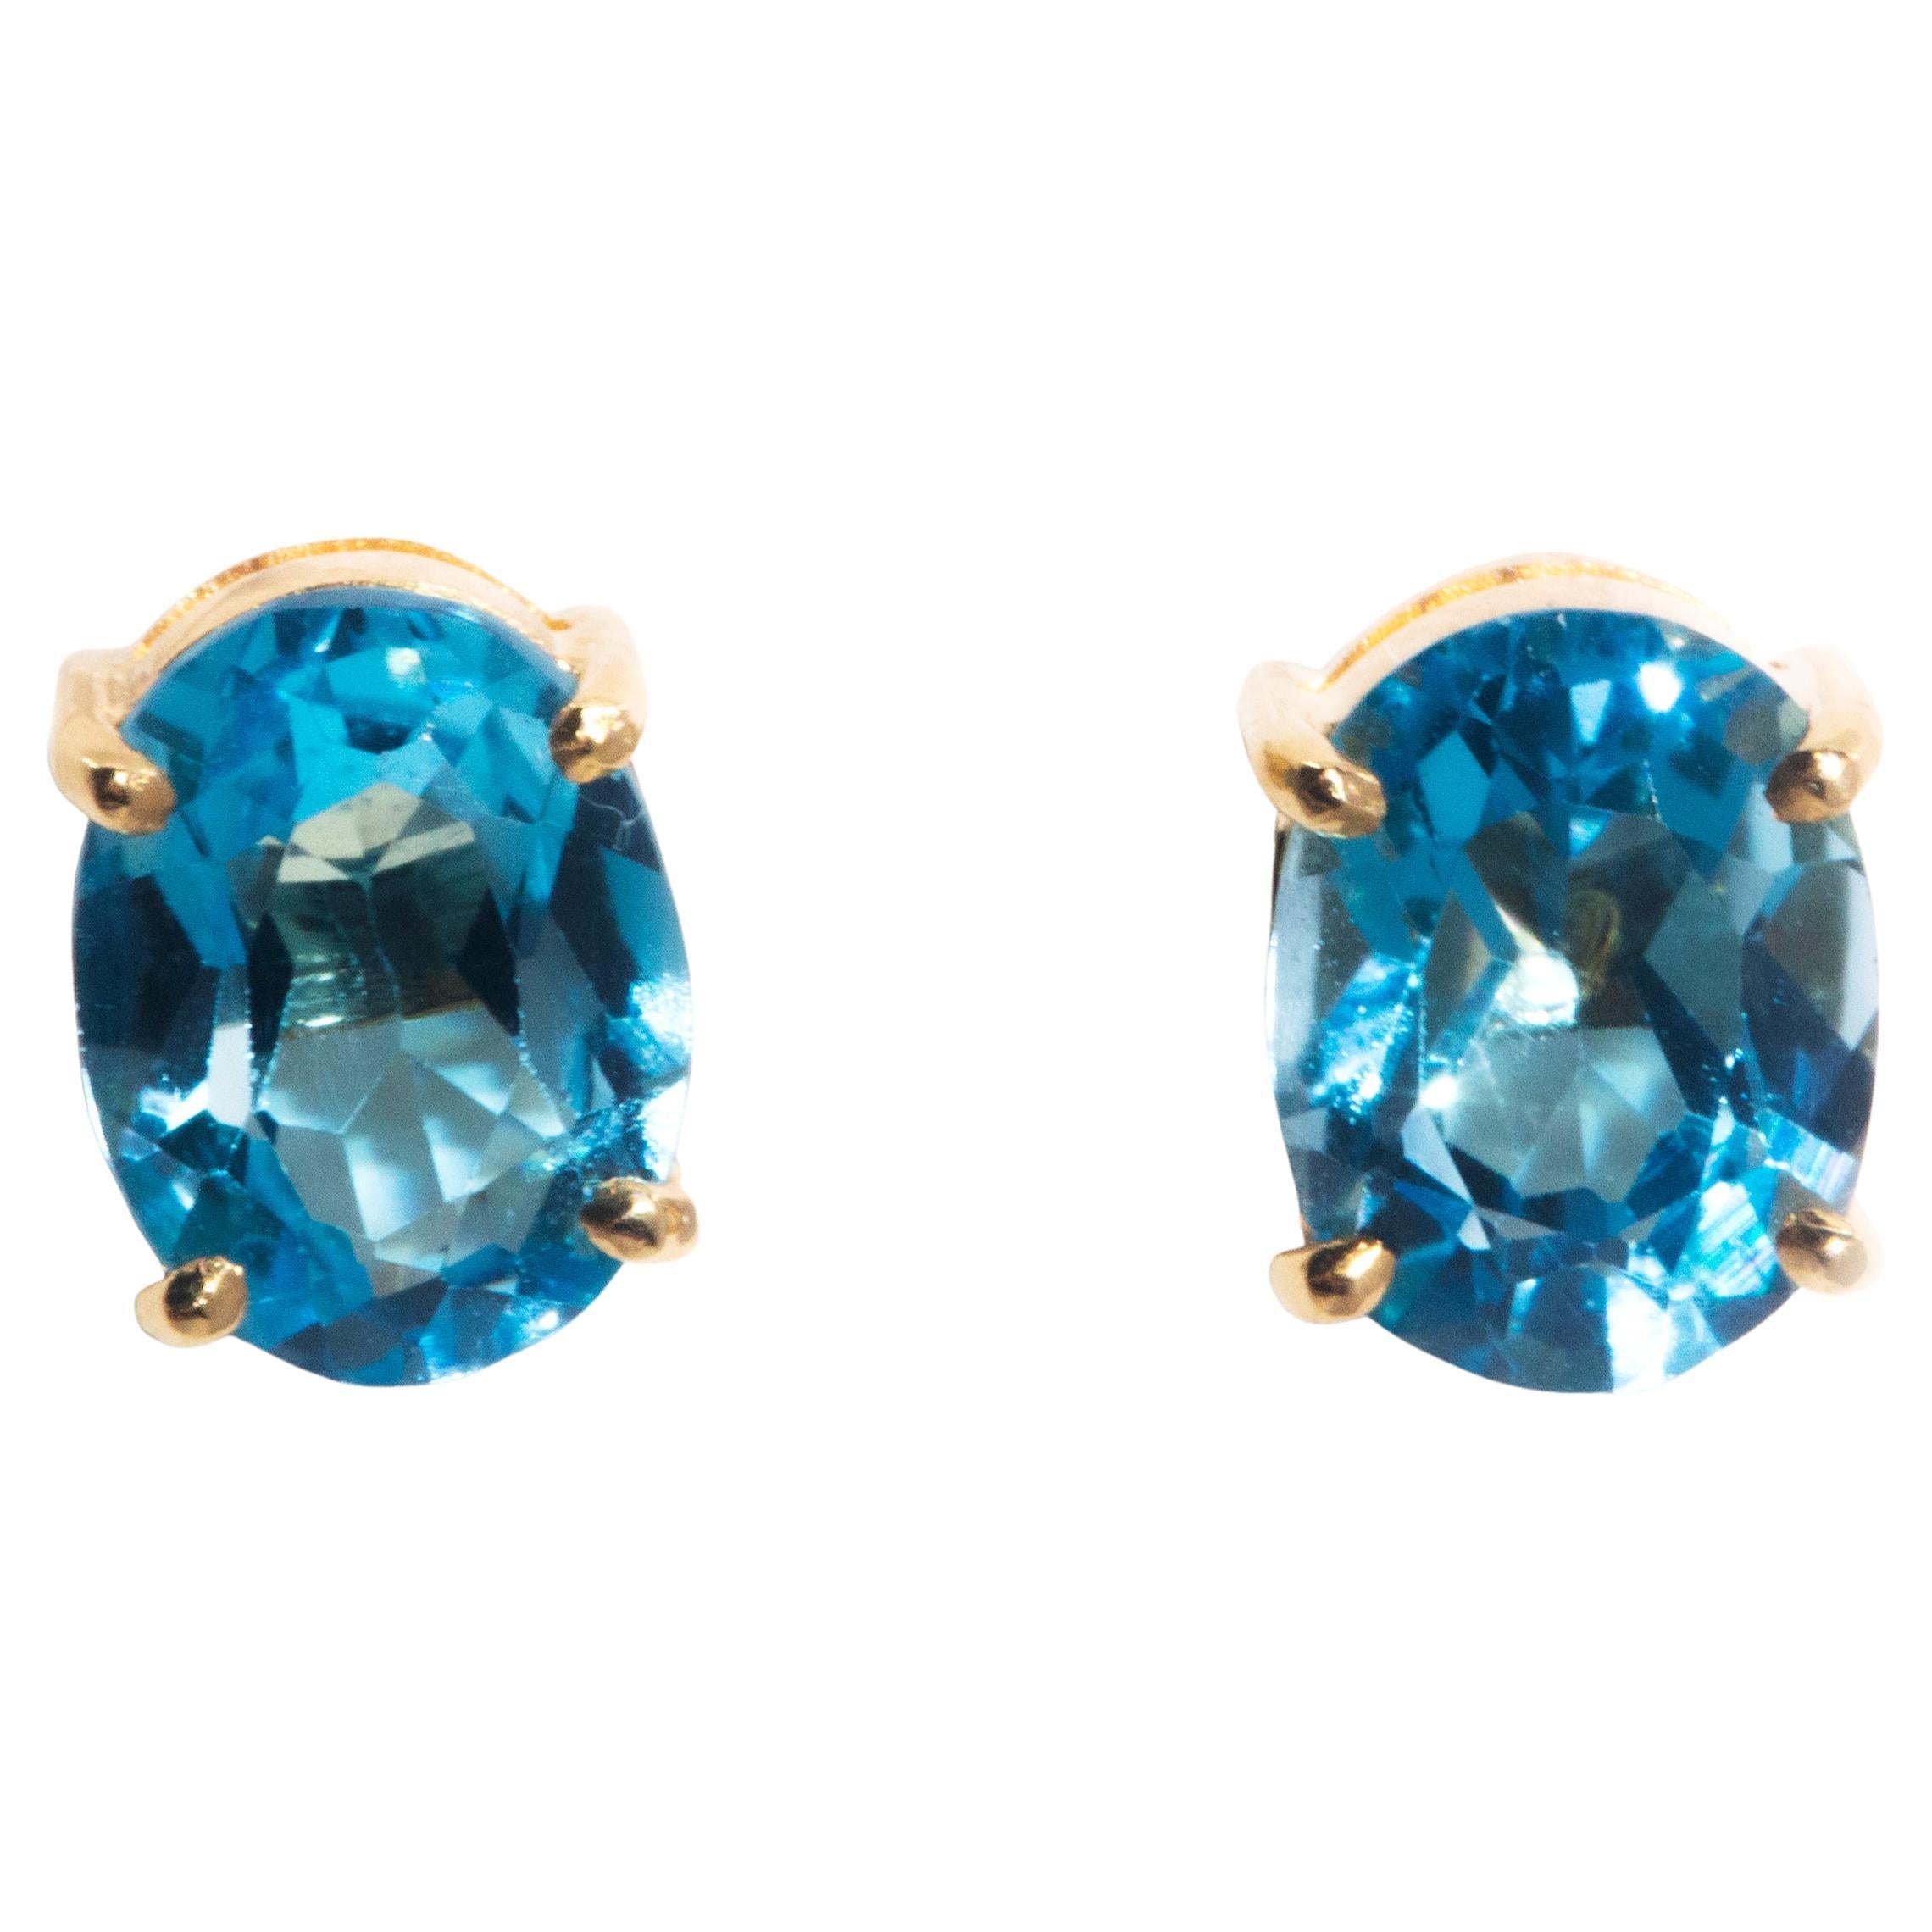 Gump's Jade Earrings in Gold, circa 1990s at 1stDibs